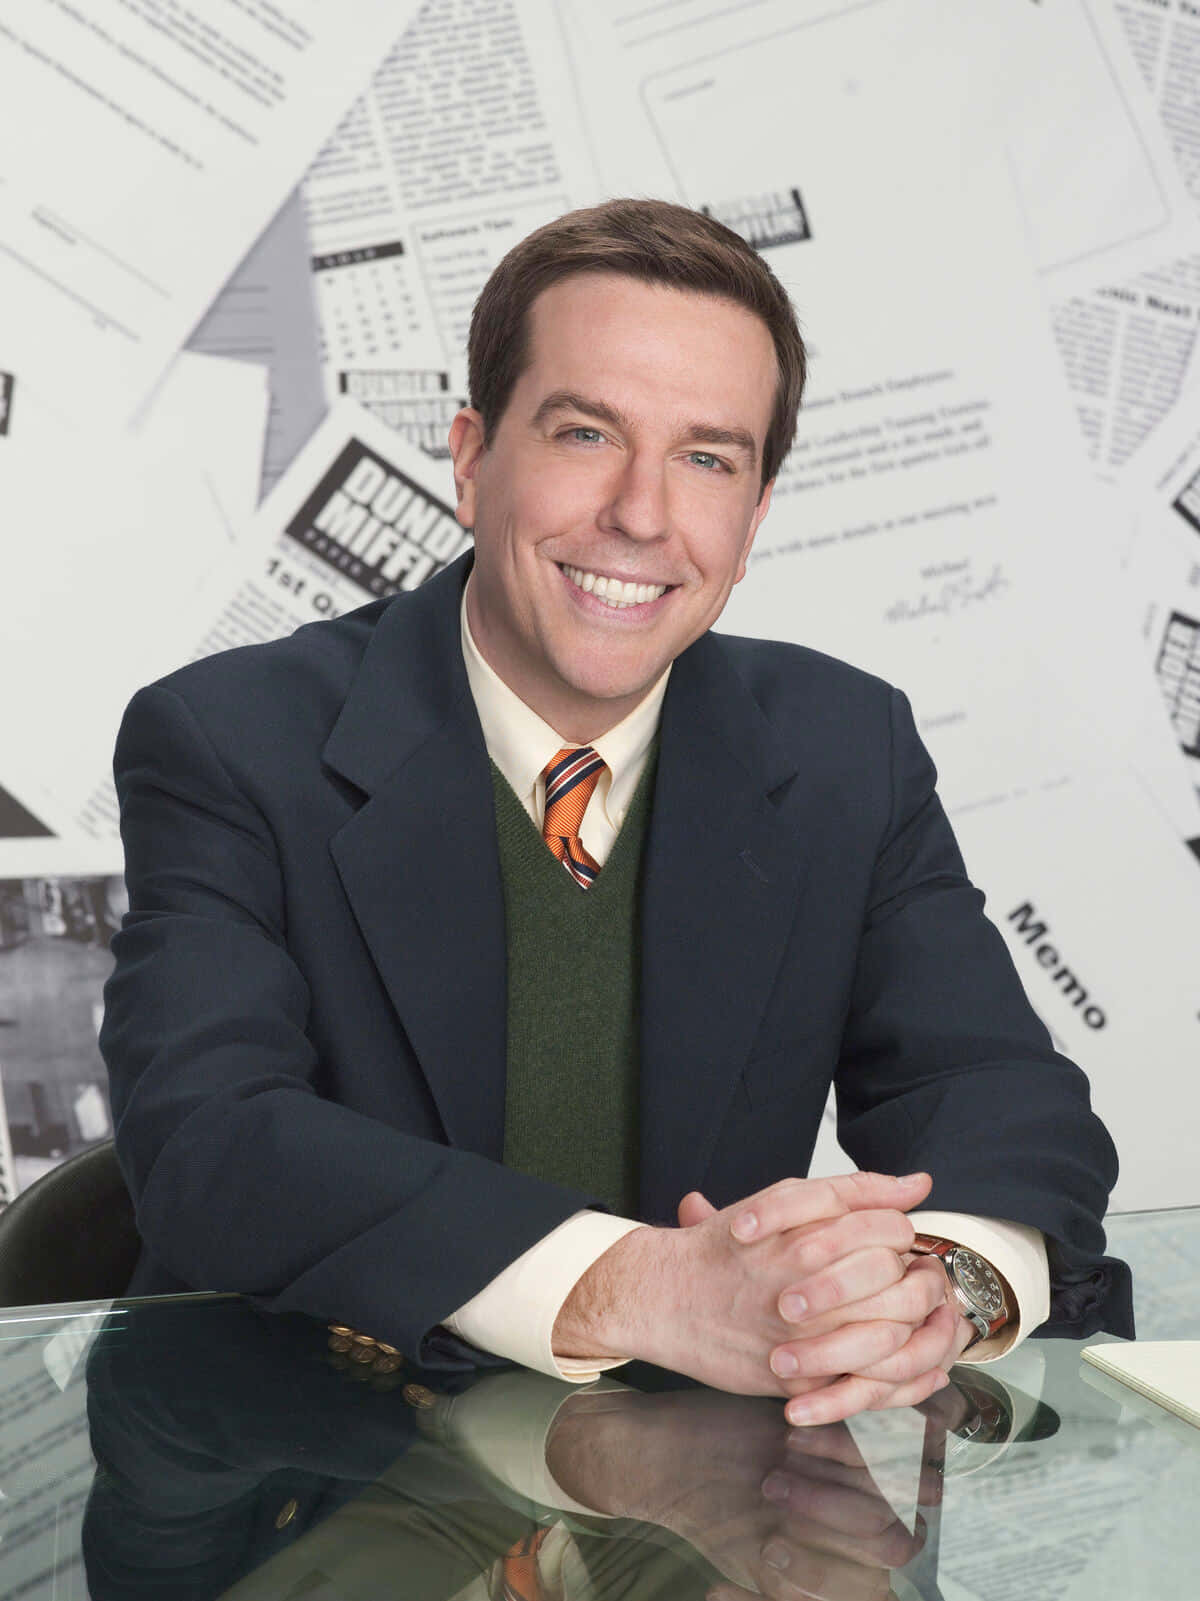 Comedic Actor Ed Helms In A Casual Interview Photo. Background